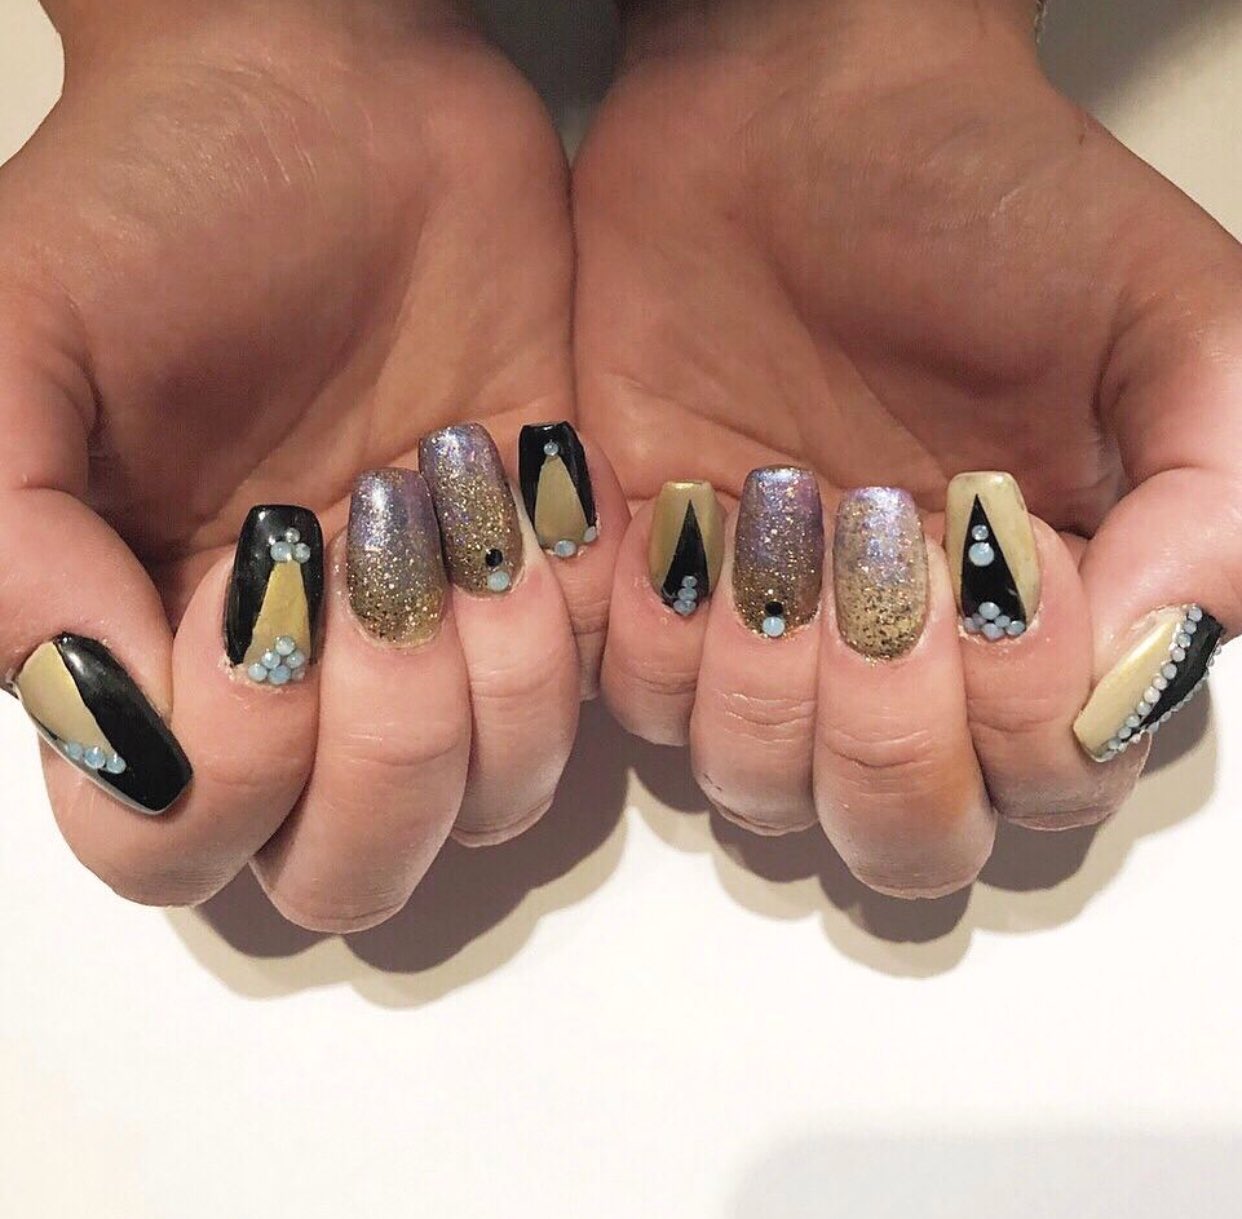 Uzivatel Kl Polish Na Twitteru Michelle Our Customer Service Lead Once Again Created Some Amazing Nailart For This Look She Used Casino Night Tuxedo Mask Paper Snow Don T Forget